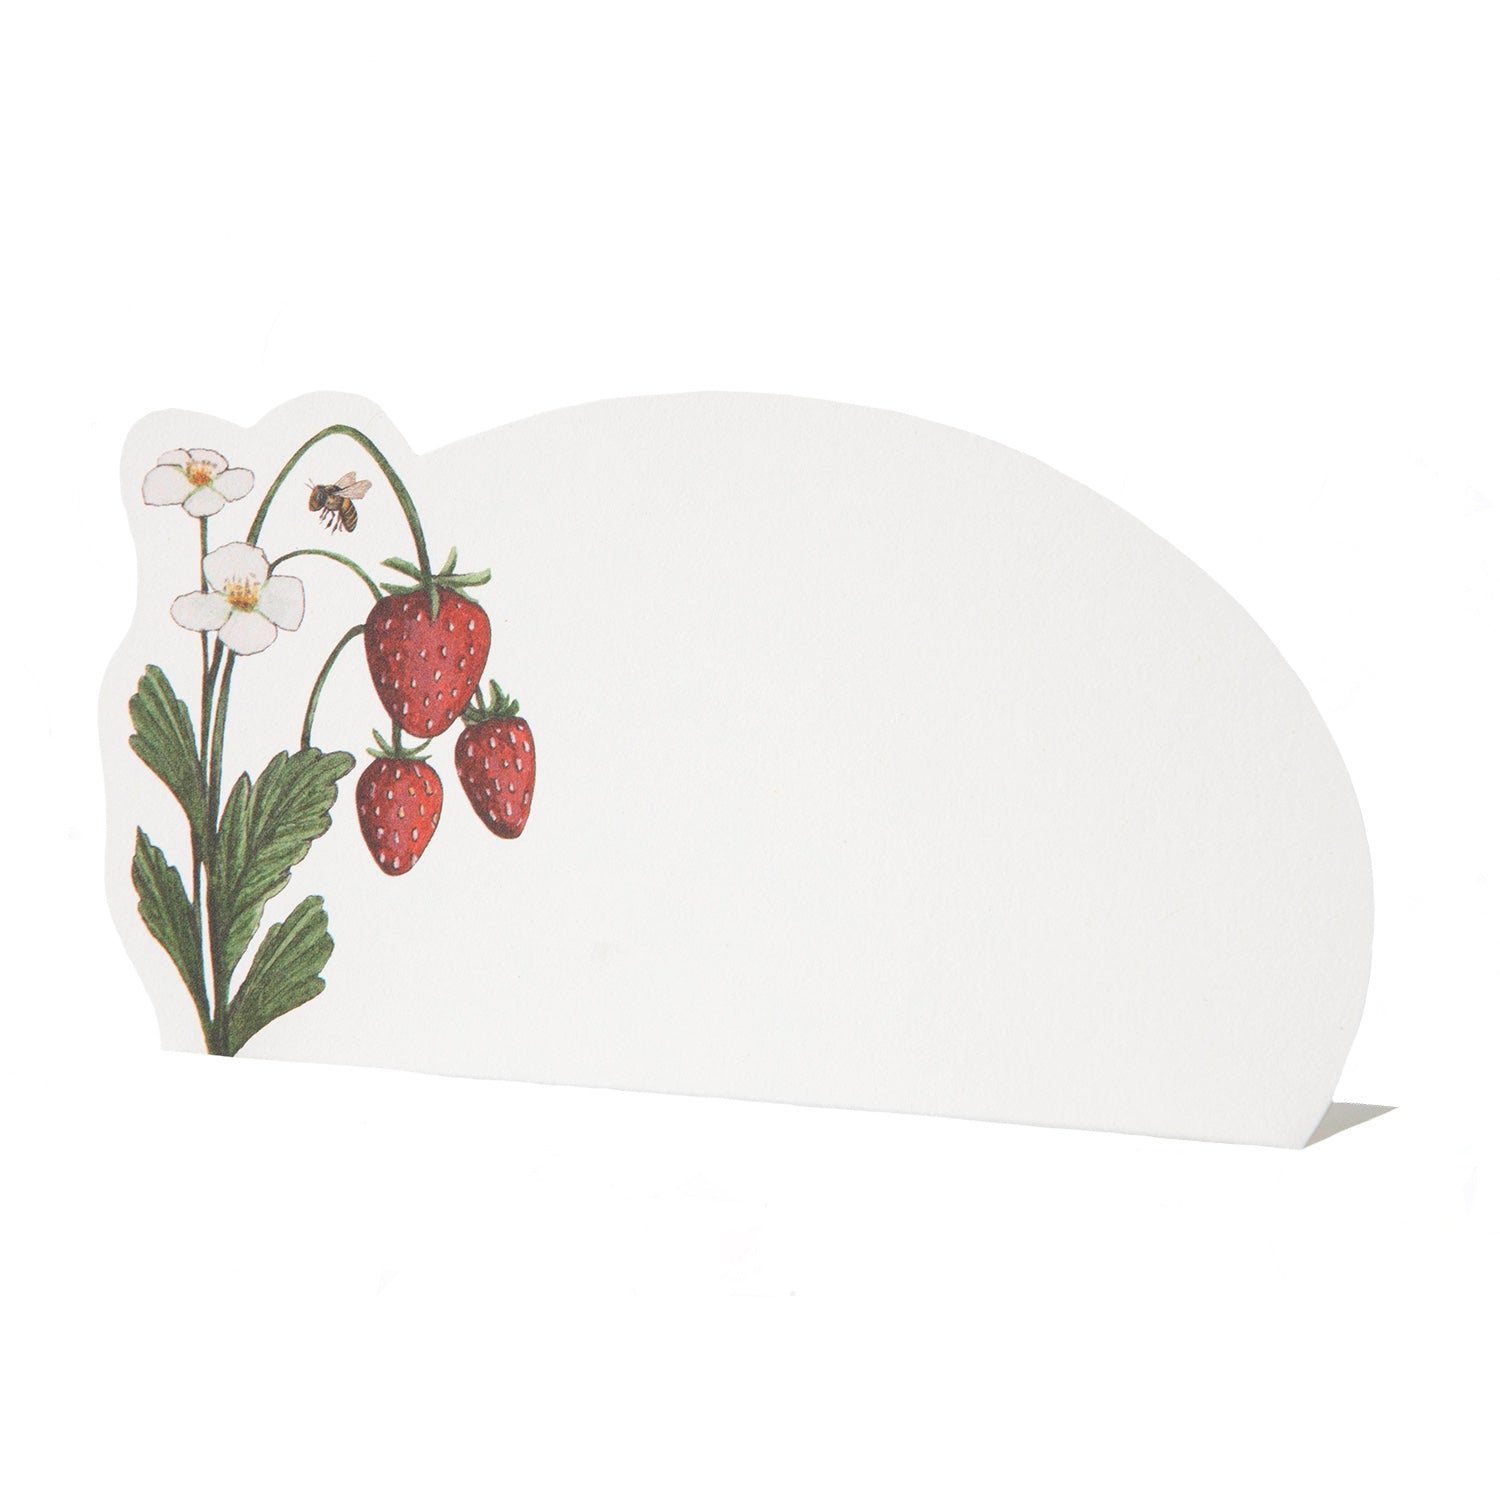 A Hester &amp; Cook Wild Berry Place Card with a picture of strawberries, perfect for a summery event in the USA.